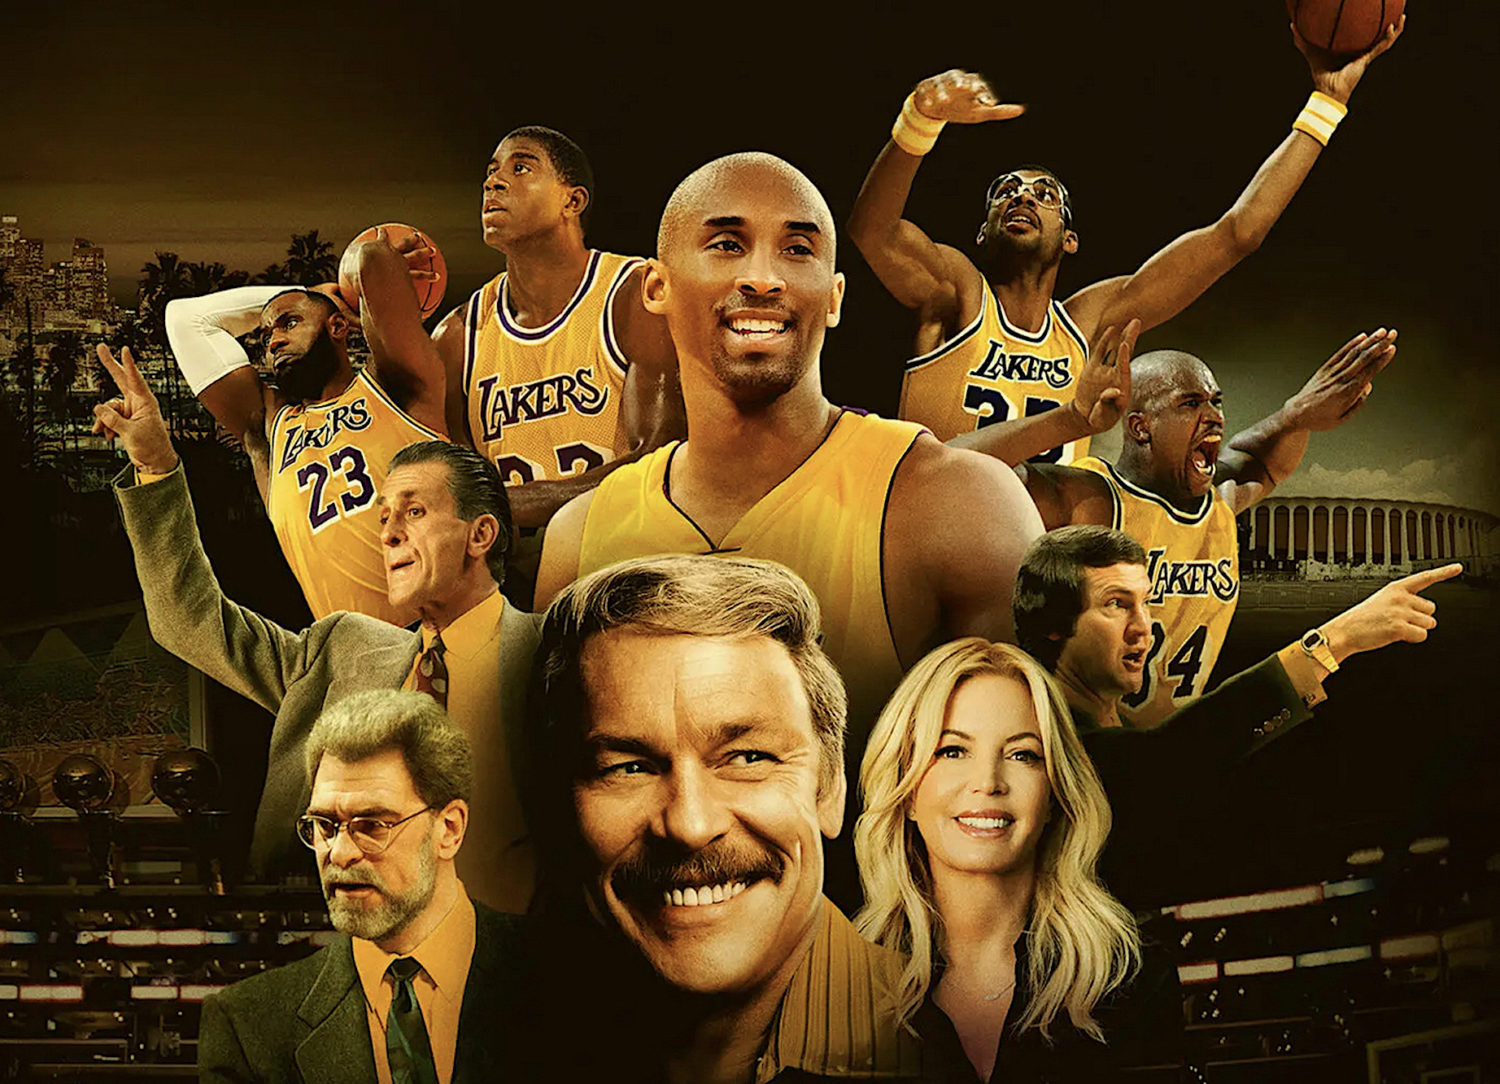 The Tragic Death of Lakers Owner Jerry Buss Rocked the Franchise